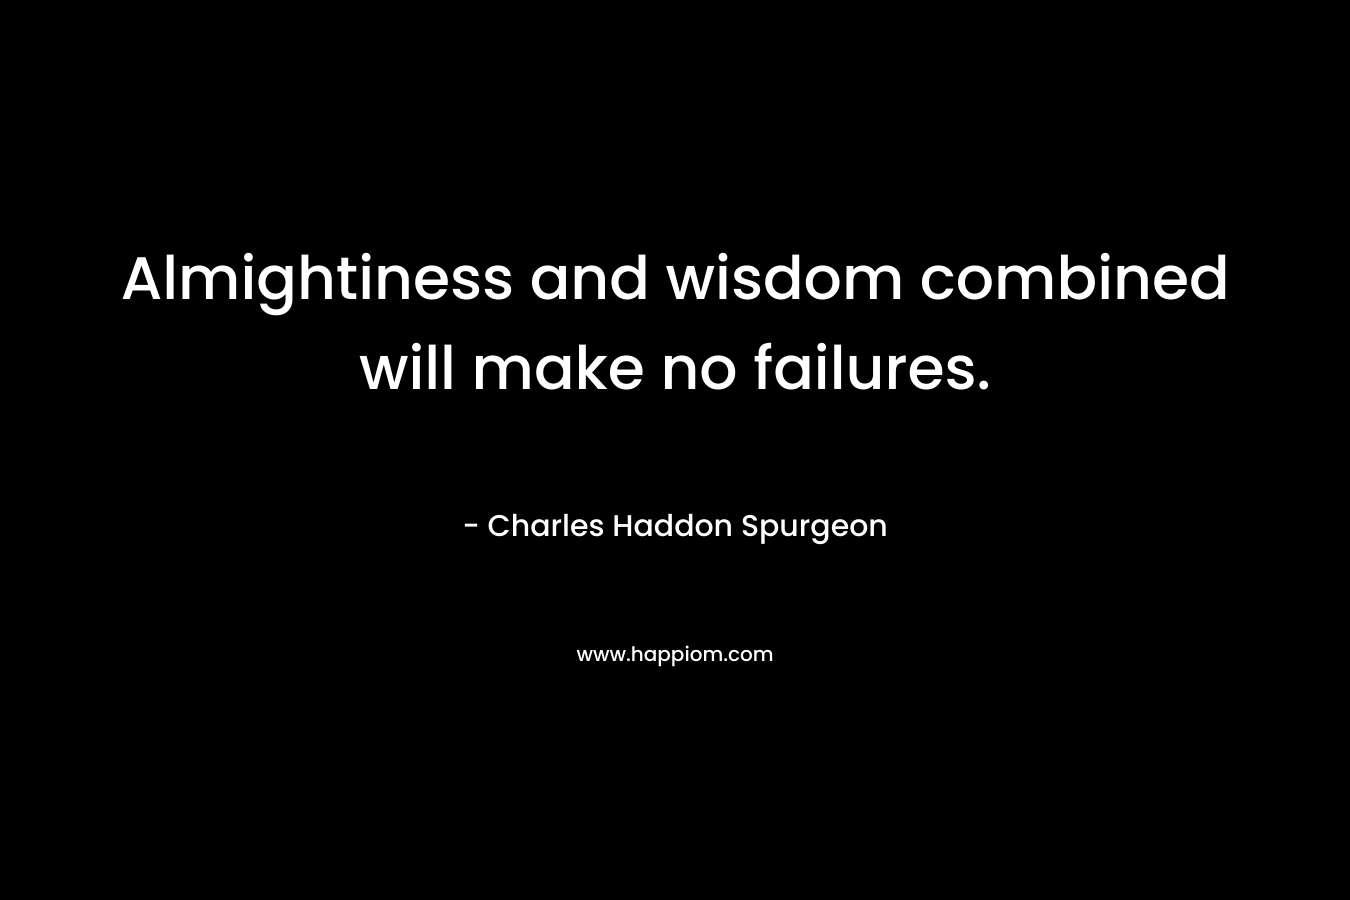 Almightiness and wisdom combined will make no failures. – Charles Haddon Spurgeon